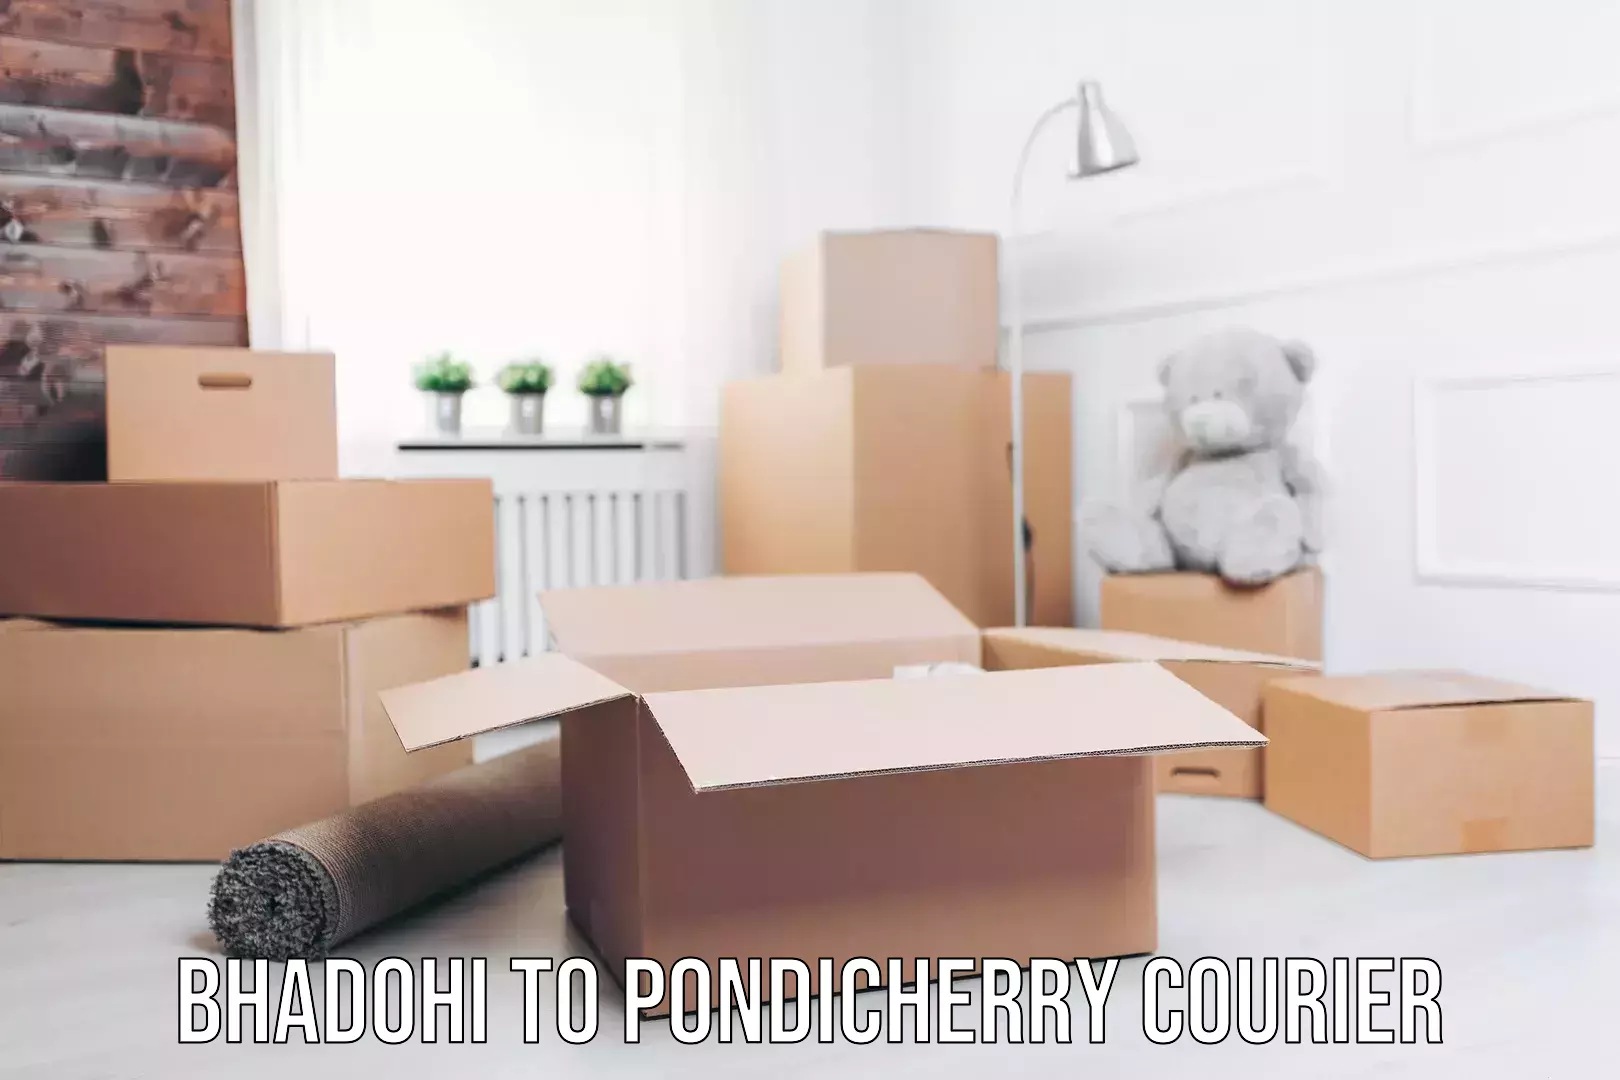 Nationwide delivery network Bhadohi to Pondicherry